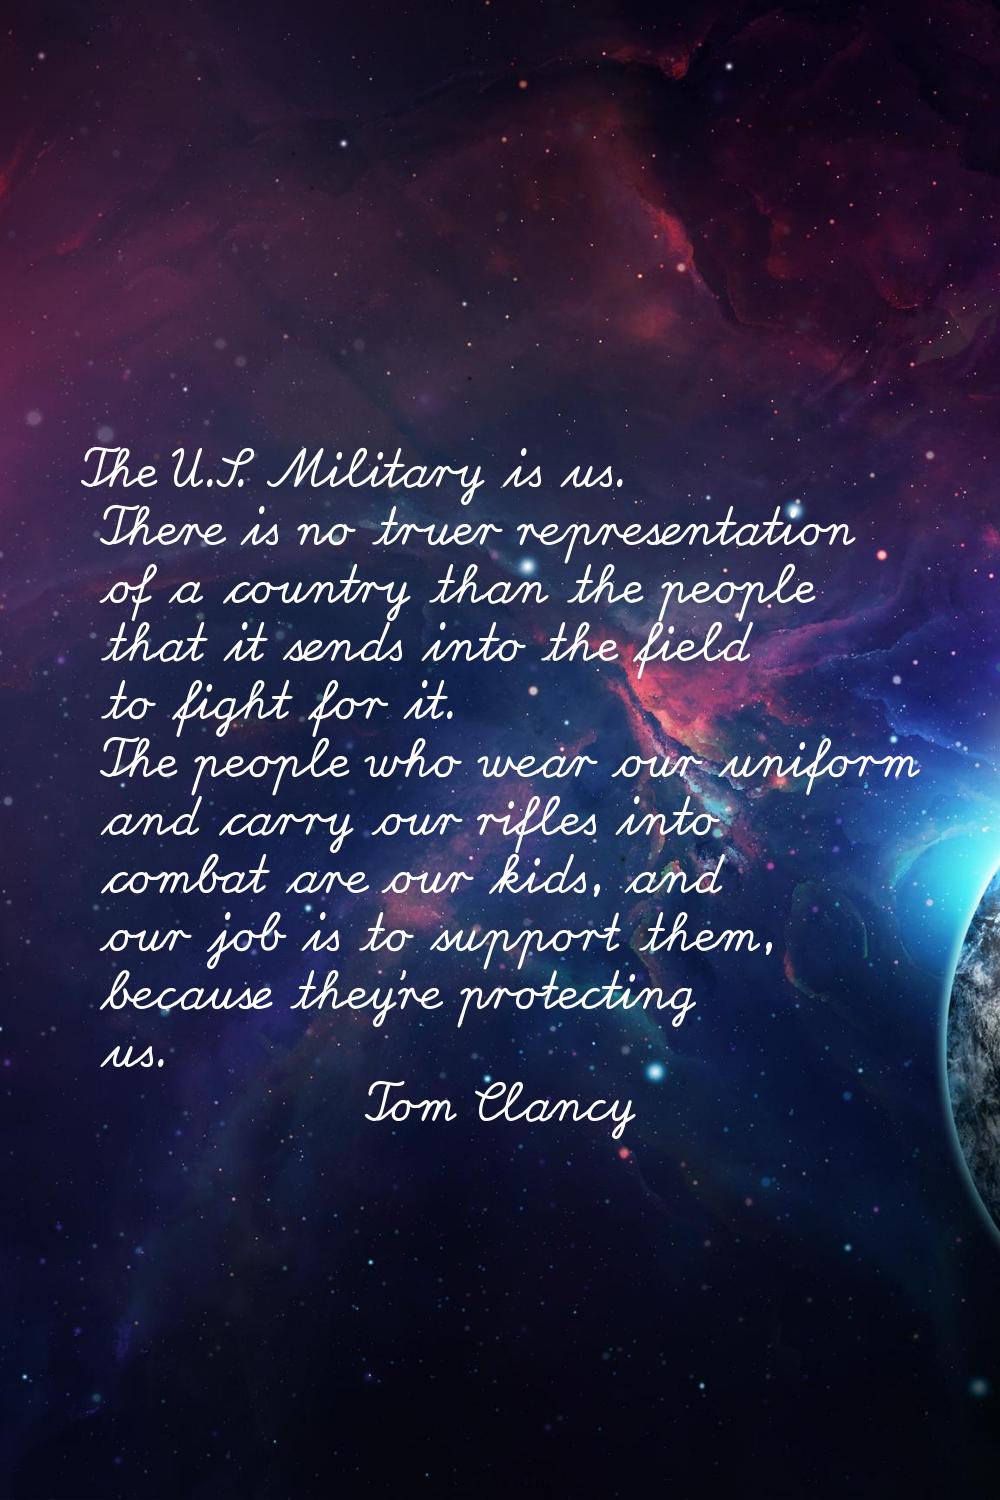 The U.S. Military is us. There is no truer representation of a country than the people that it send